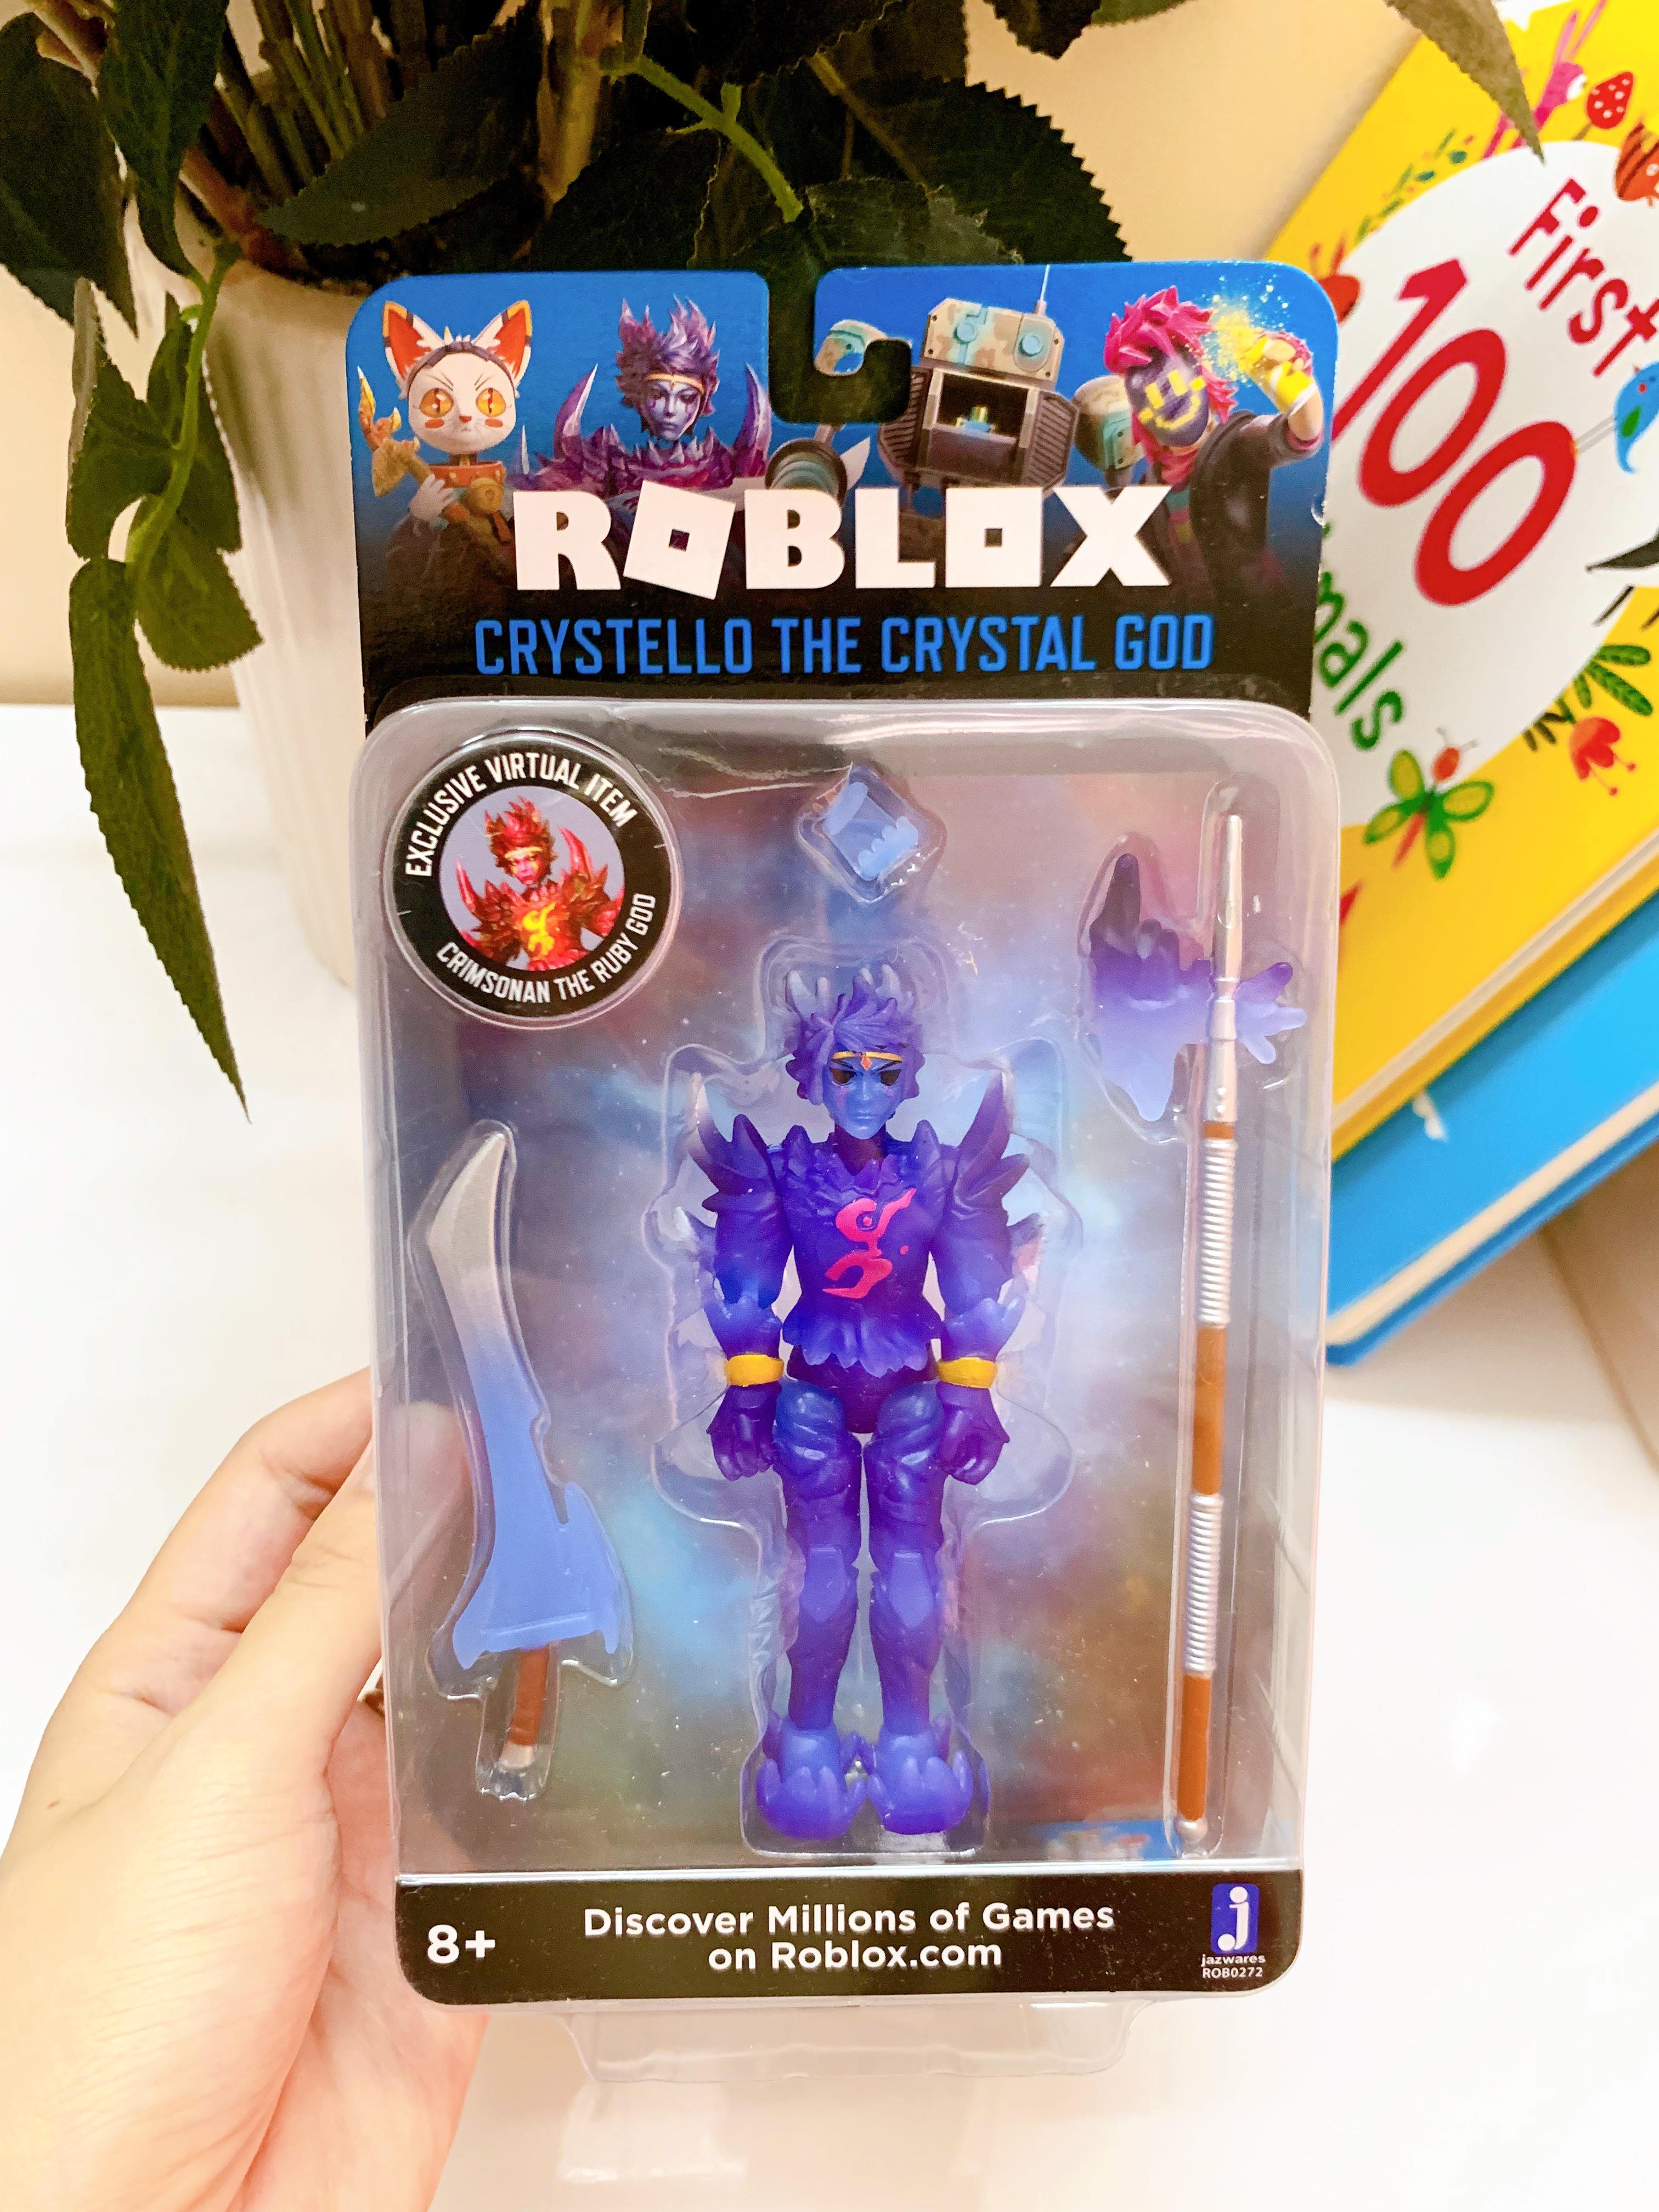 Roblox Chinh Hang Co Code Roblox Toy Crystello Lazada Vn - bán robux.vn